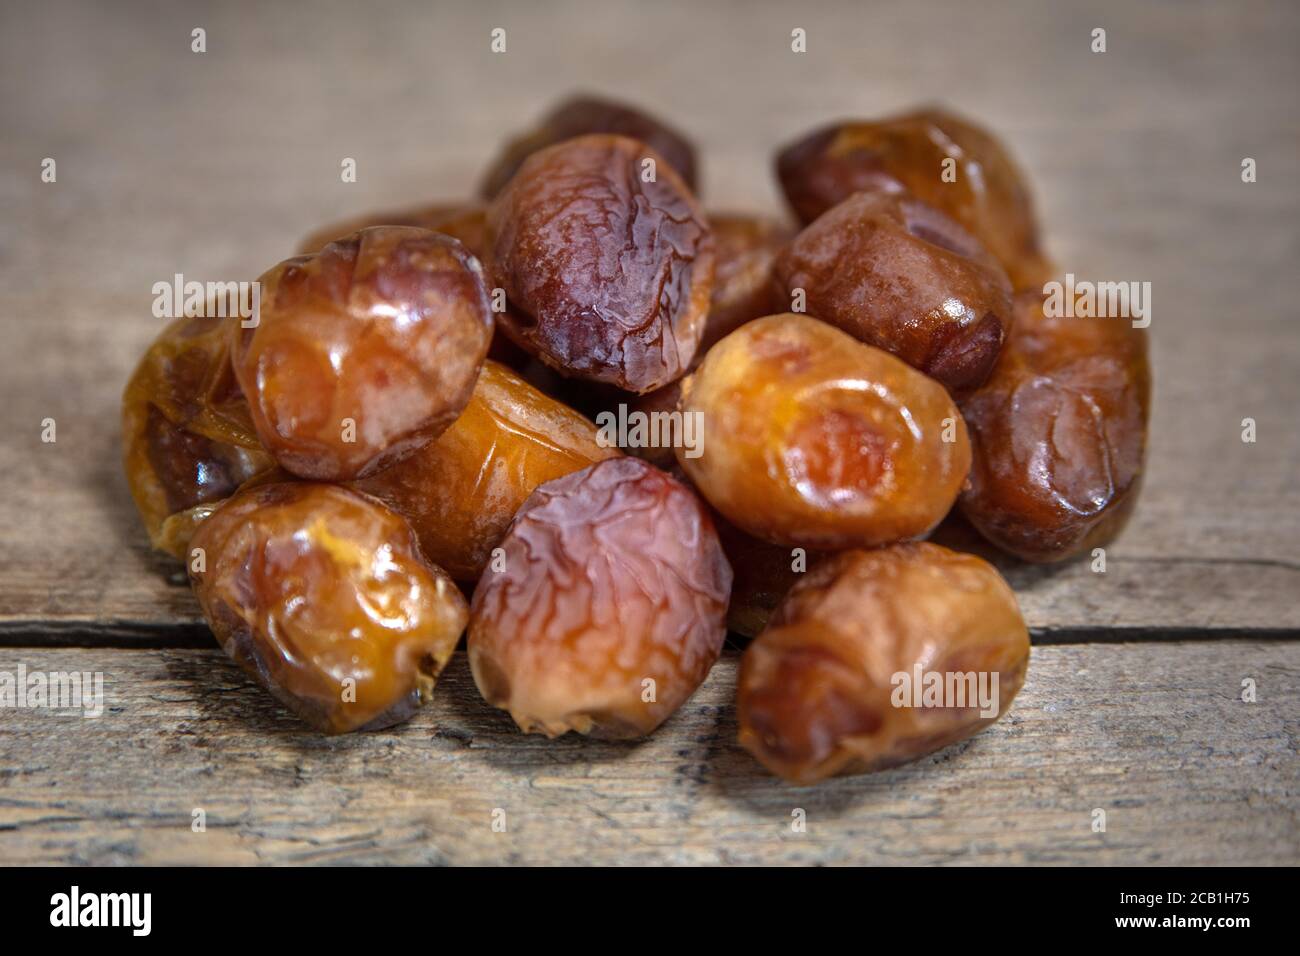 Dried dates on wooden table, sort soft bawalini, sweet vegan superfruit Stock Photo